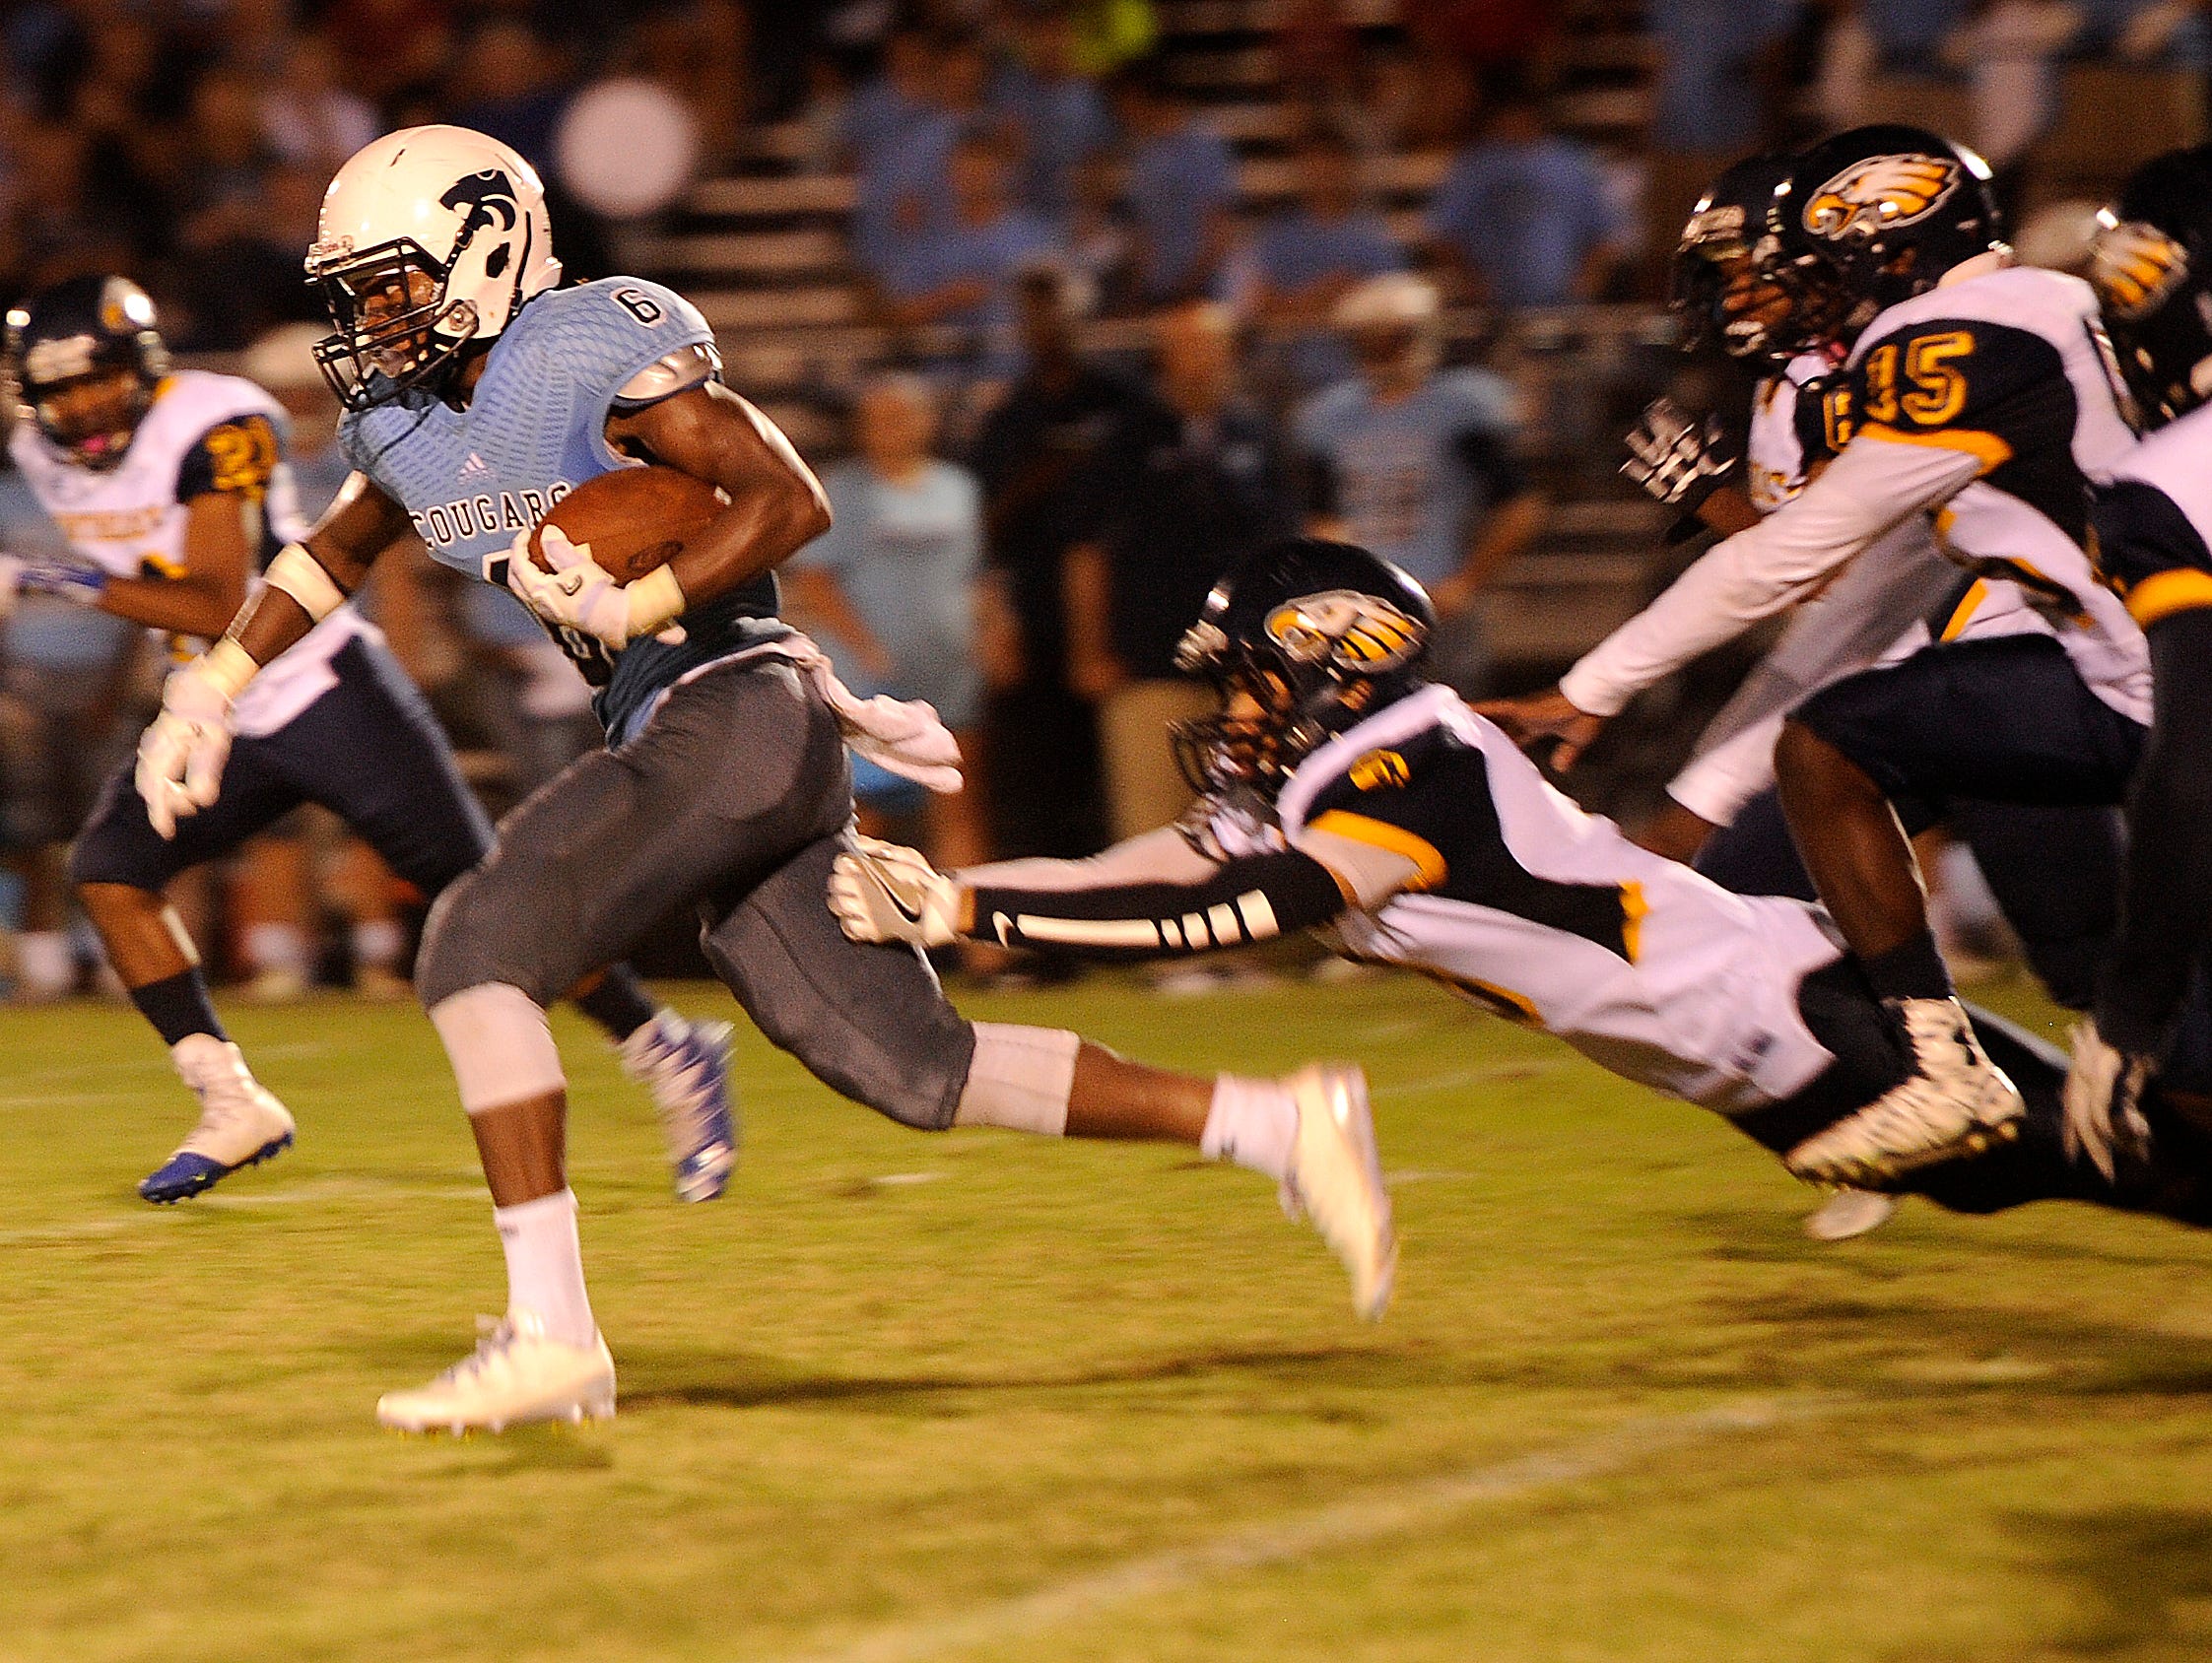 Jariel Wilson rushed for 200 yards and three touchdowns in a 21-3 Centennial win over Northeast.